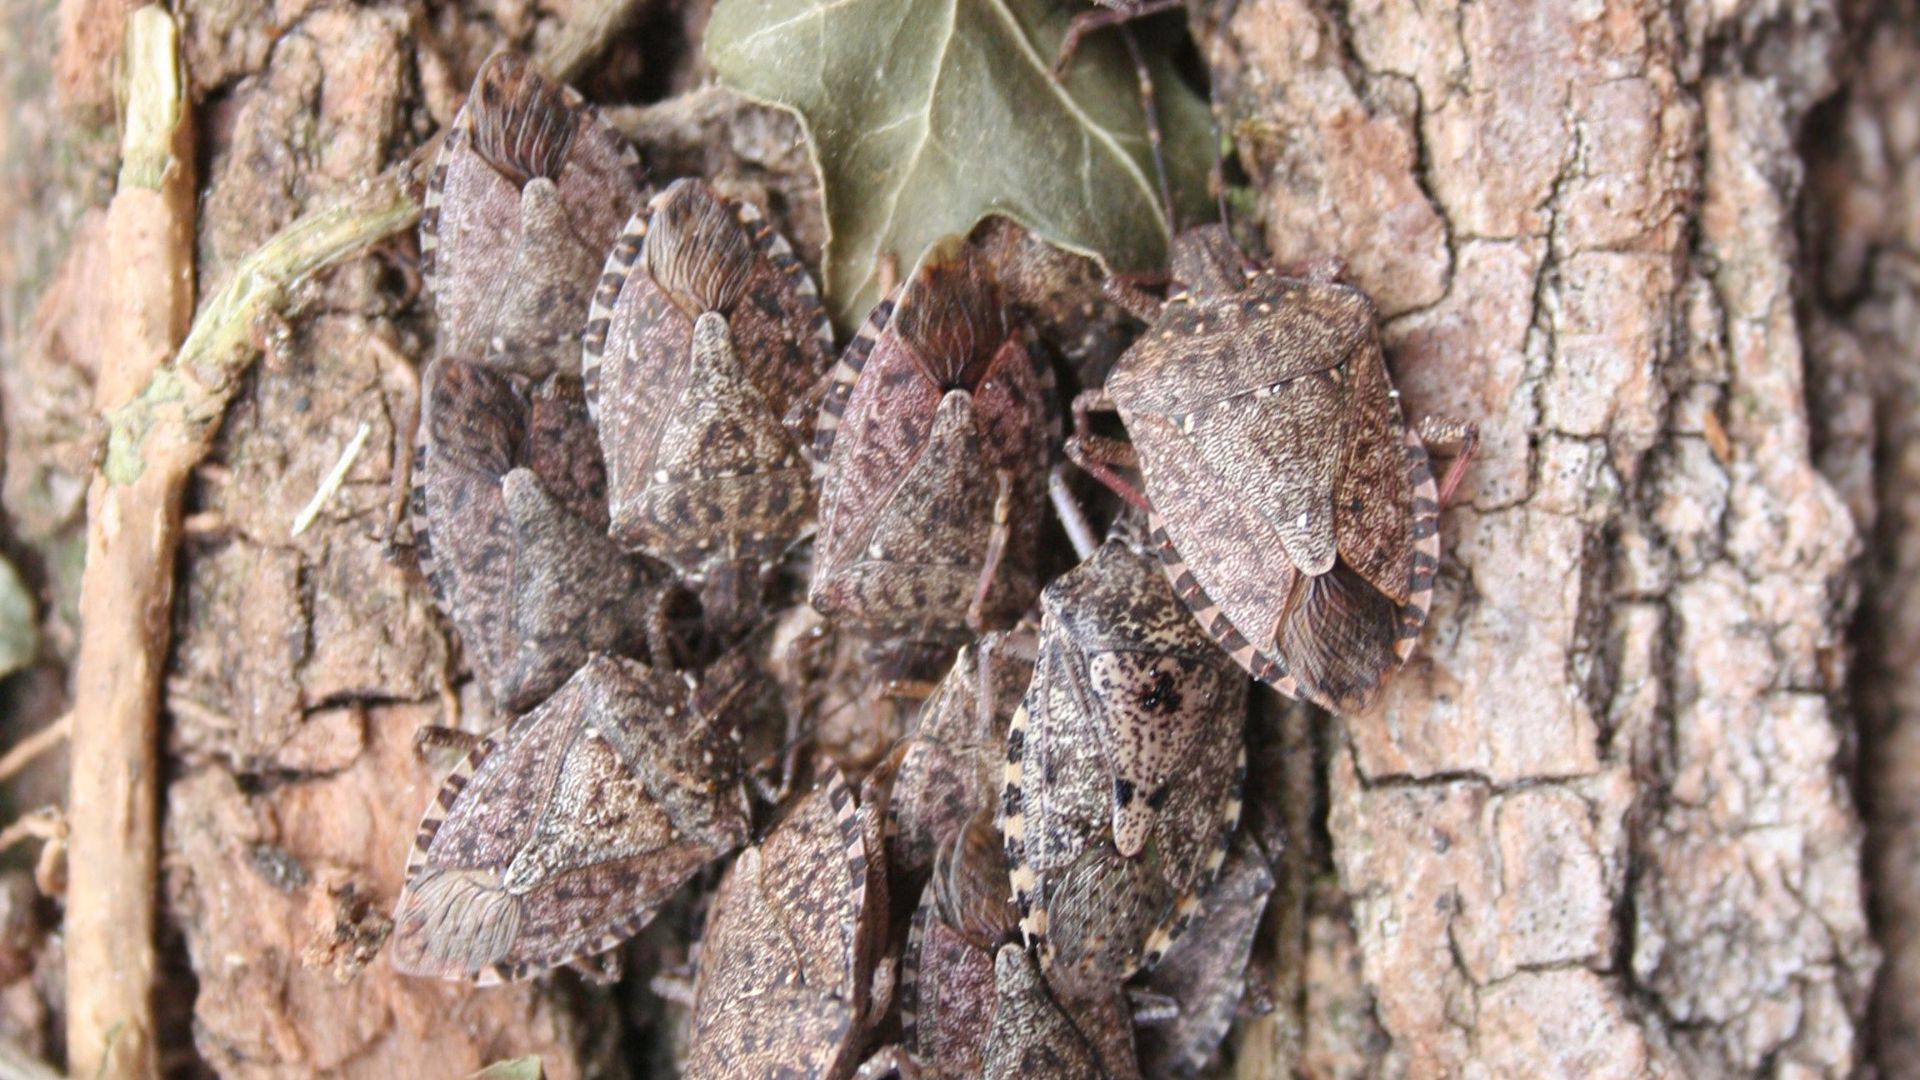 An image of several stink bugs congretating on the bark of a tree. 